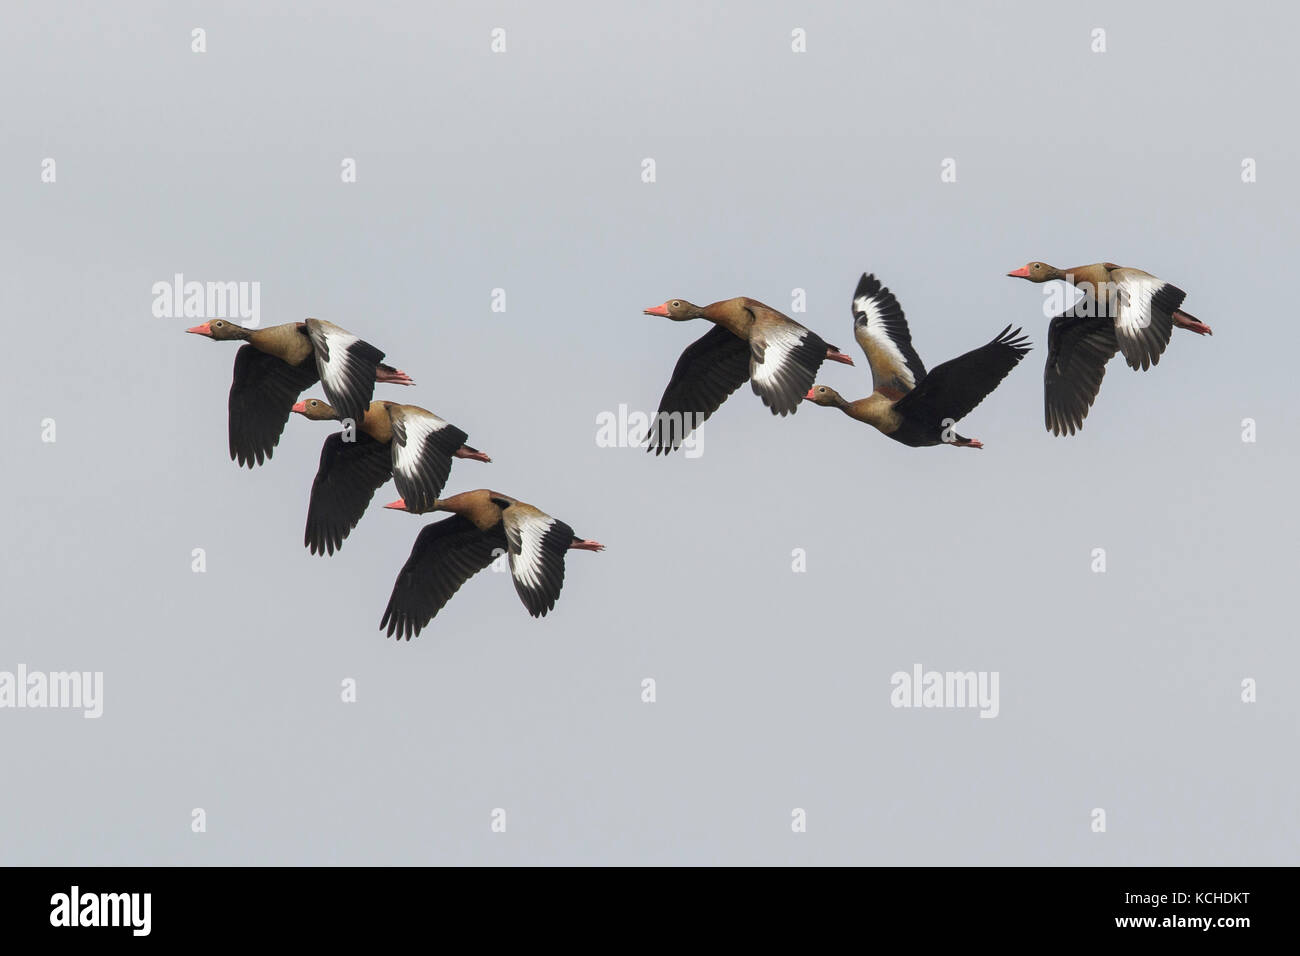 Black-bellied Whistling Duck (Dendrocygna autumnalis) flying in the Pantanal region of Brazil. Stock Photo